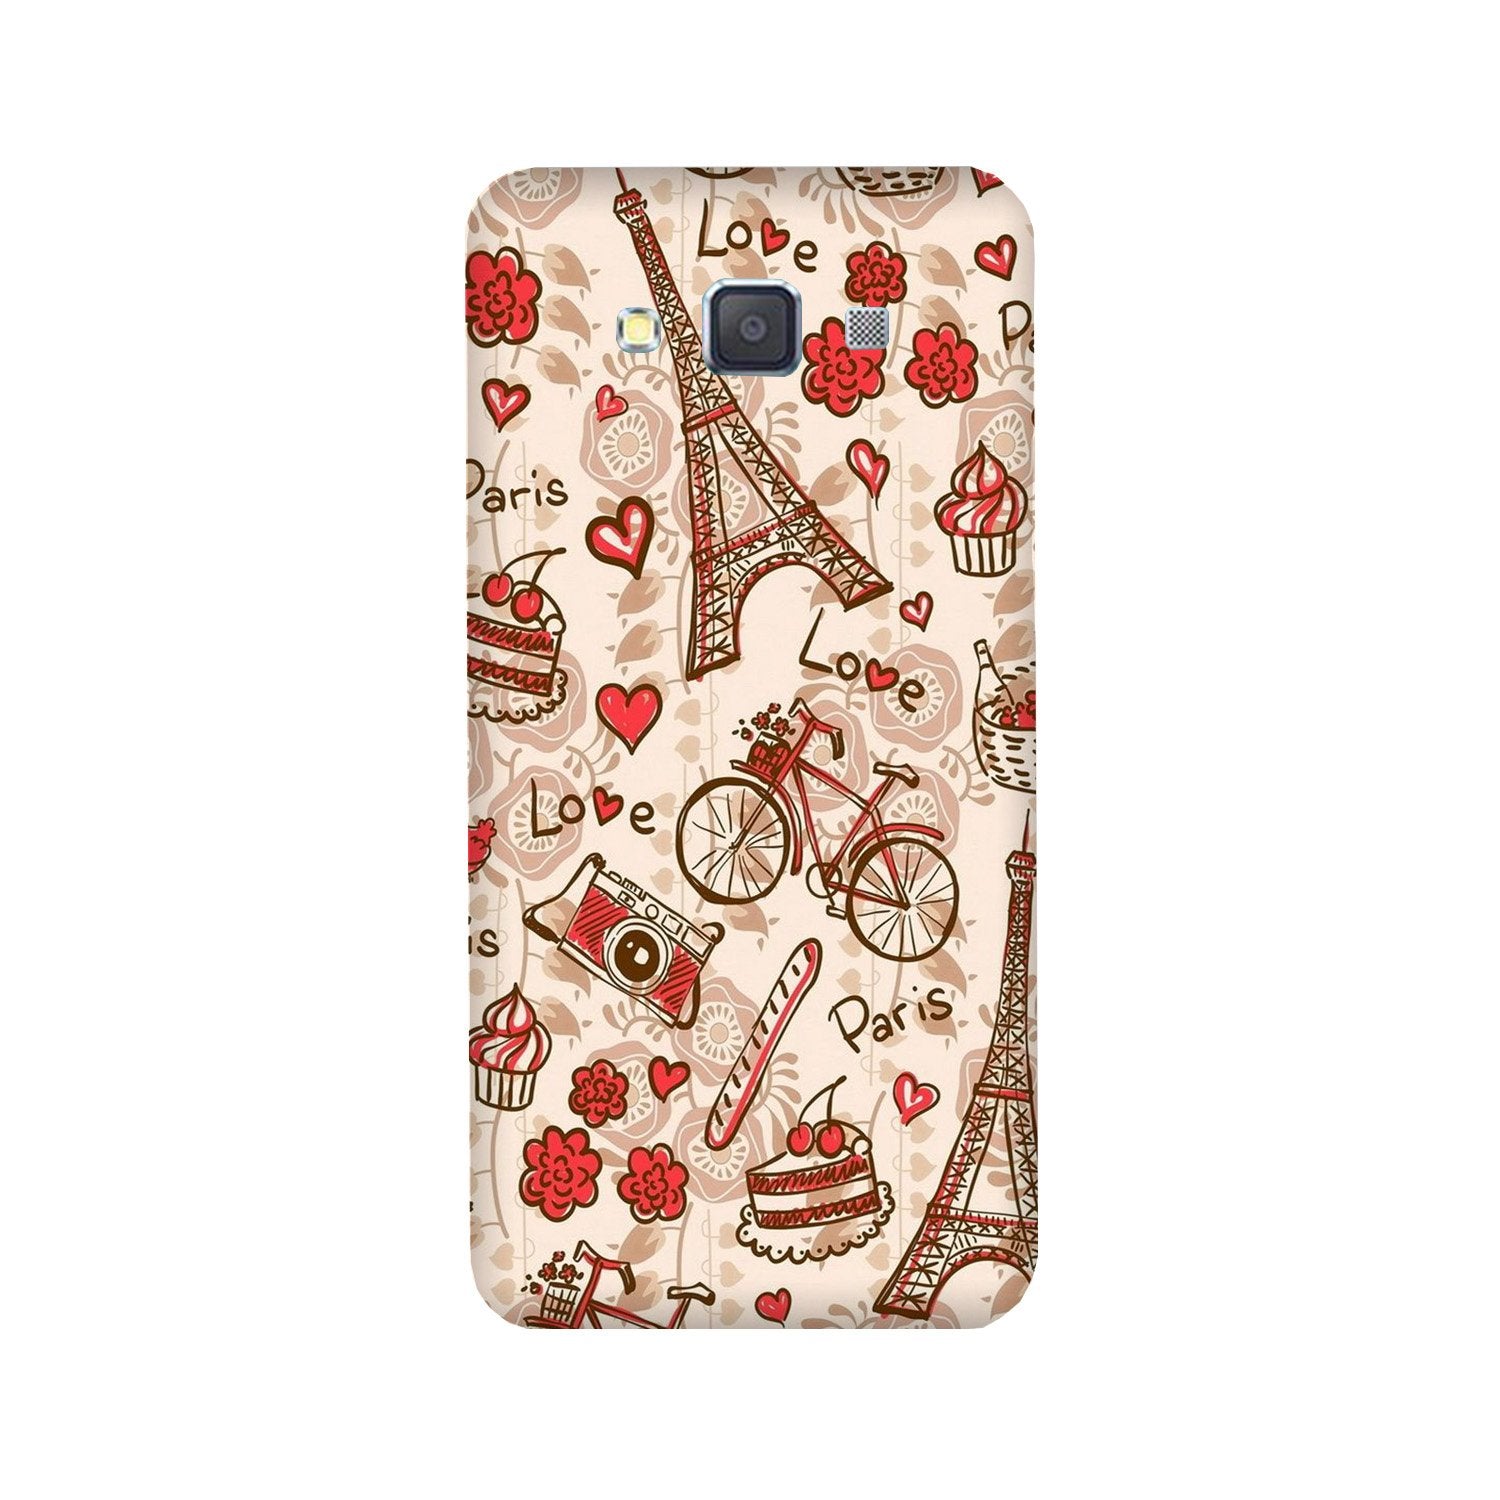 Love Paris Case for Galaxy ON7/ON7 Pro  (Design - 103)